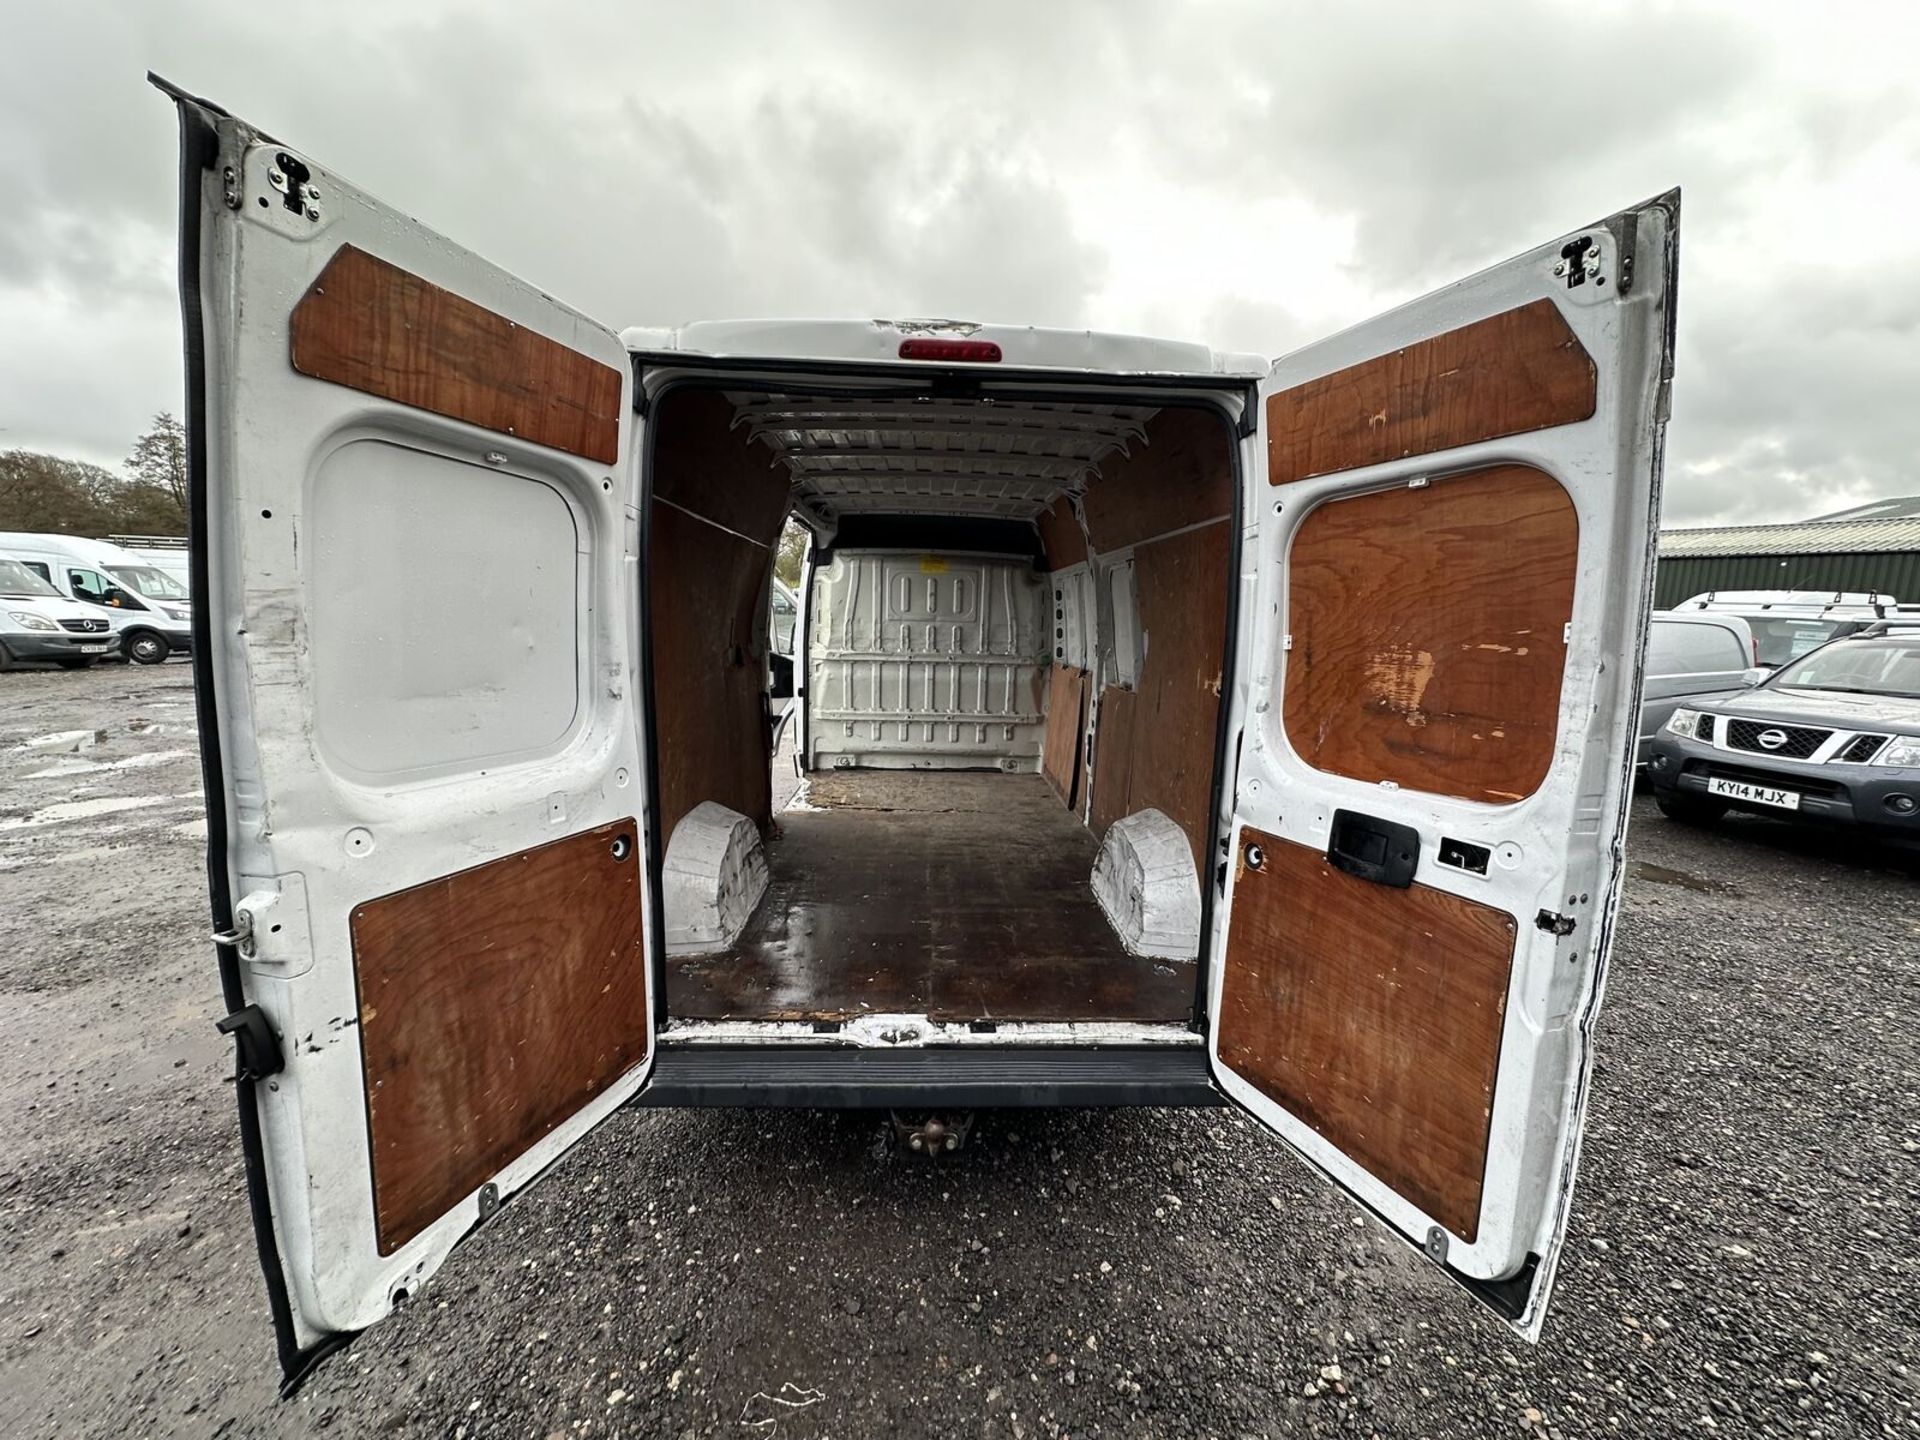 READY FOR ADVENTURE: 65 PLATE DUCATO 35 MULTIJET LWB - Image 16 of 19